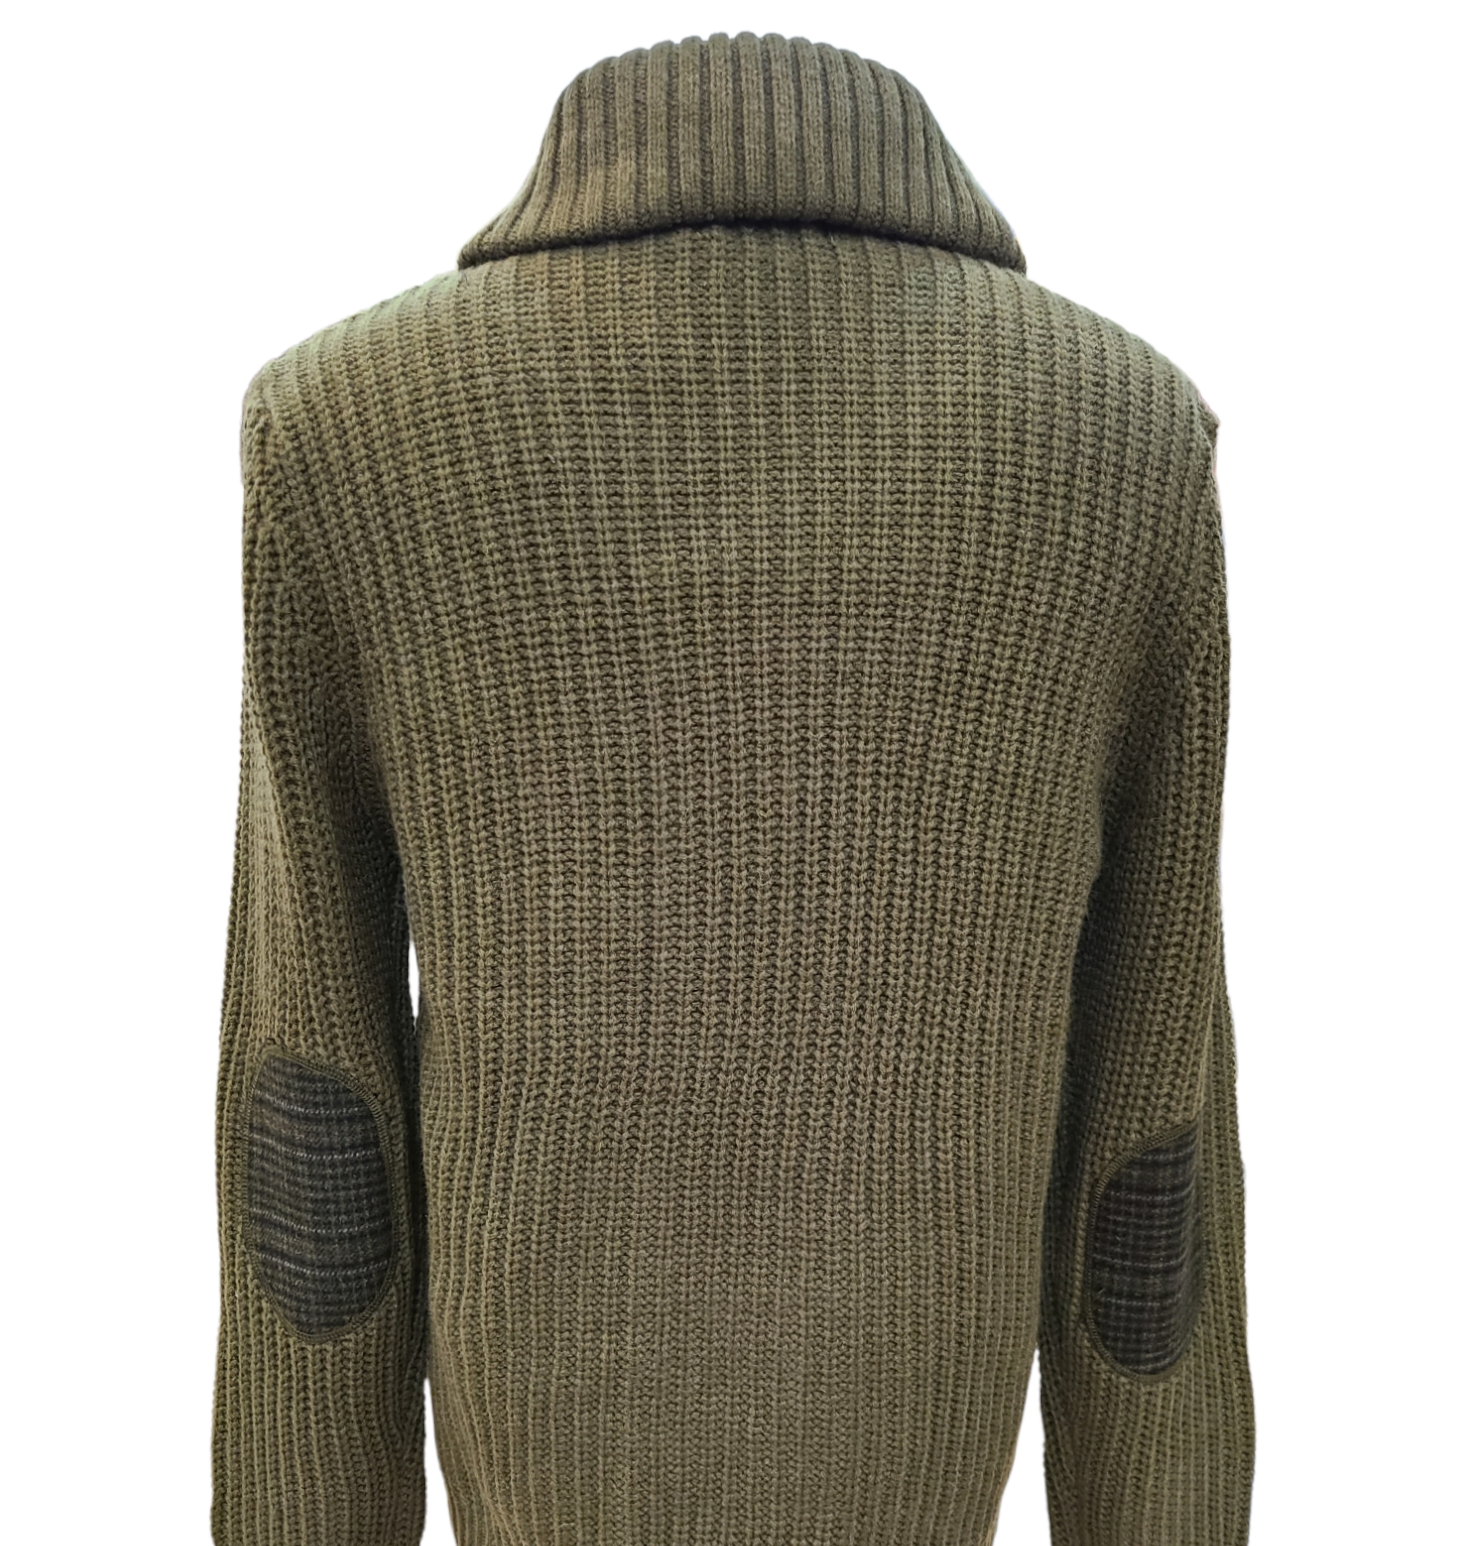 Lavane DB knitted  Sweater